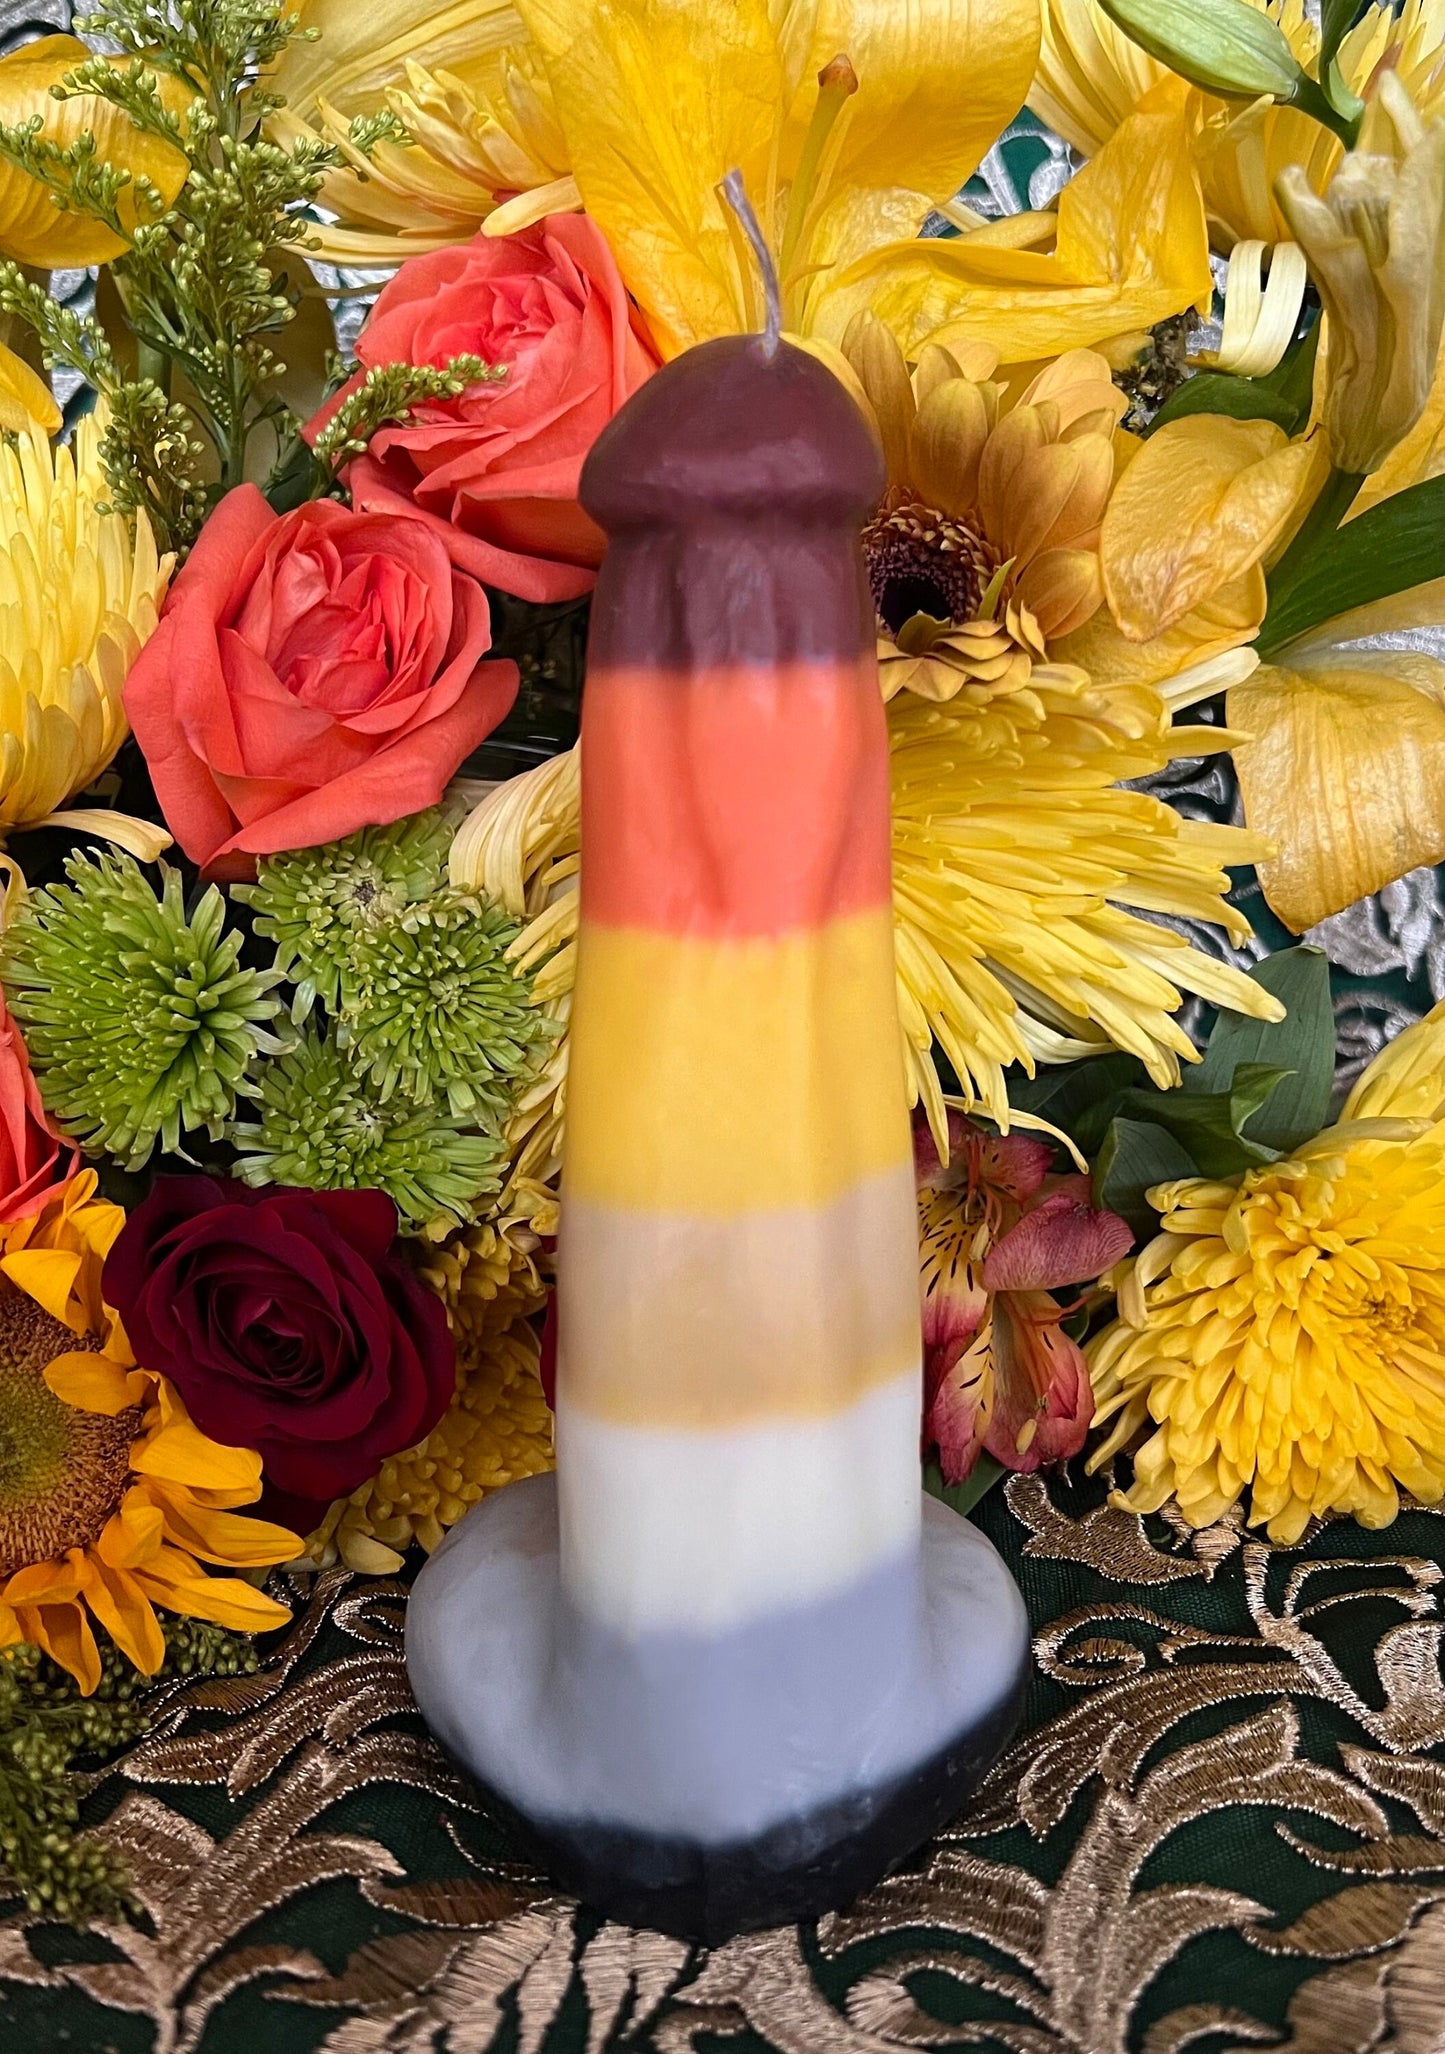 Bear Pride Penis Candle + Passion + Sex + Casual Encounters